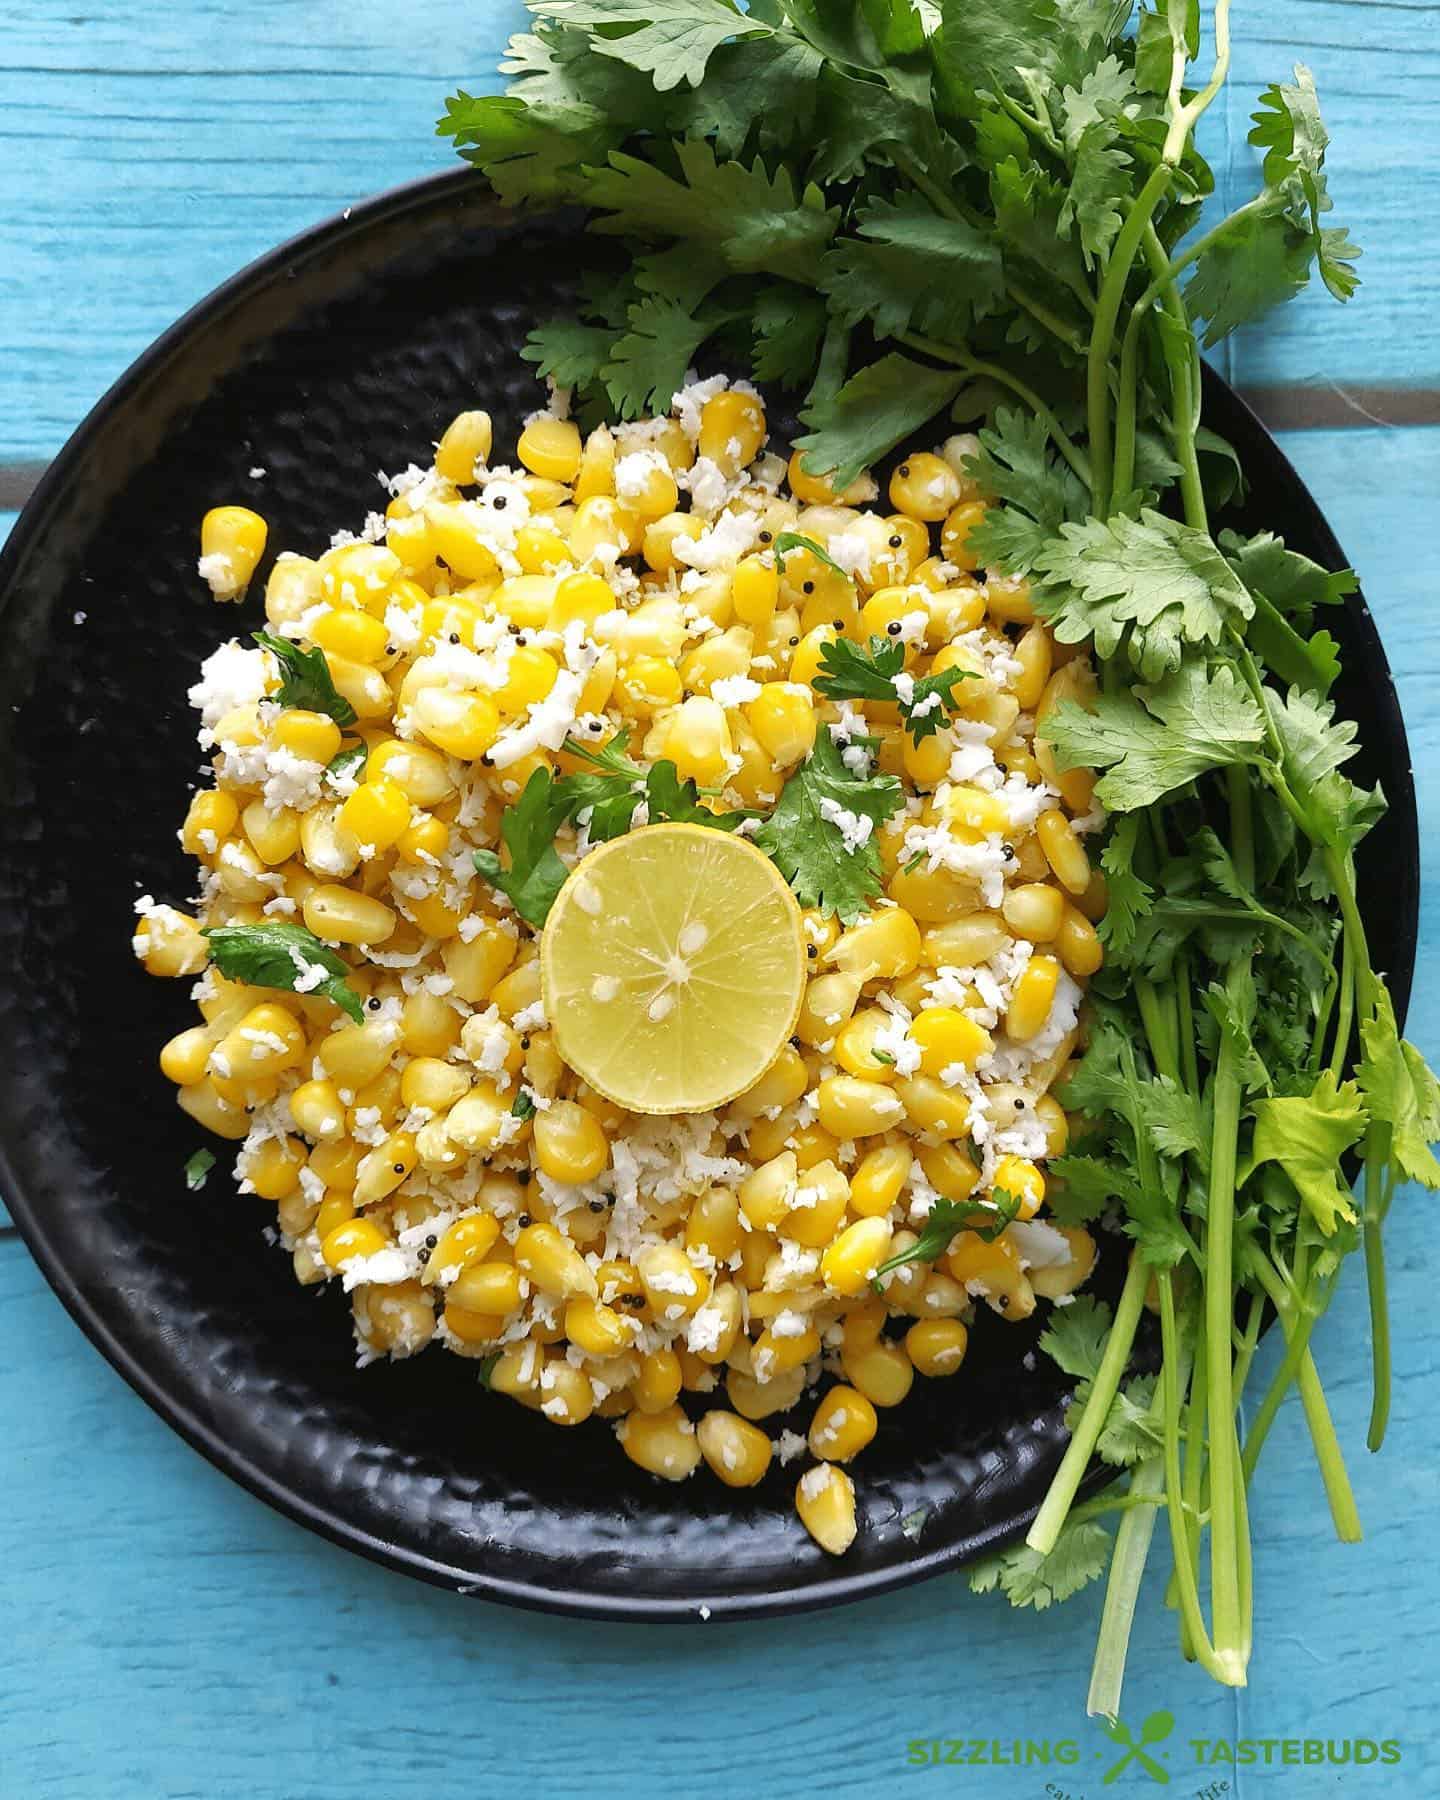 day #9 of #30days30saladssizzlingtastebuds - 

Sweet Corn 🌽 Kosambari ಸ್ವೀಟ್ ಕಾರ್ನ್ ಕೋಸಂಬರಿ (South Indian Style Sweet Corn Salad), that can be a meal, snack or a tasty side. 

5 reasons to make this #quicksalad
1️⃣ Low fat, low carb AND delicious! 
2️⃣ steamed, and can be 100% oil free
3️⃣ can be a meal by itself for #weightwatchers 
4️⃣ 100% plantbased and Gluten Free
5️⃣ totally customisable with adding / deleting the toppings
.
.
👉👉 follow @sizzlingtastebuds for more #salad recipes - all 100% homemade and healthy. ❤️❤️
👉👉 Recipe link in the bio 👆 @sizzlingtastebuds or simply DM me for the recipe. 
👉👉 Alternatively, simply GOOGLE Sweet Corn Kosambari Sizzling Tastebuds
👉👉 click on the hashtag and follow #30days30saladsSizzlingTastebuds to see what the past salads in the series has been. 
.
.
#sizzlingtastebuds  #salad #saladrecipe #lowcarb #glutenfreevegan #vegansofig #sweetcornsalad #sweetcorn #sweetcorns #kosambari #kosumalli #kosmalli #cornkosambari #sweetcornrecipes #sweetcornrecipes🌽 #healthyfood #corn #foodiesofinstagram #americansweetcorn #americansweetcornsalad #saladsofinstagram #saladsofinstagram🌱